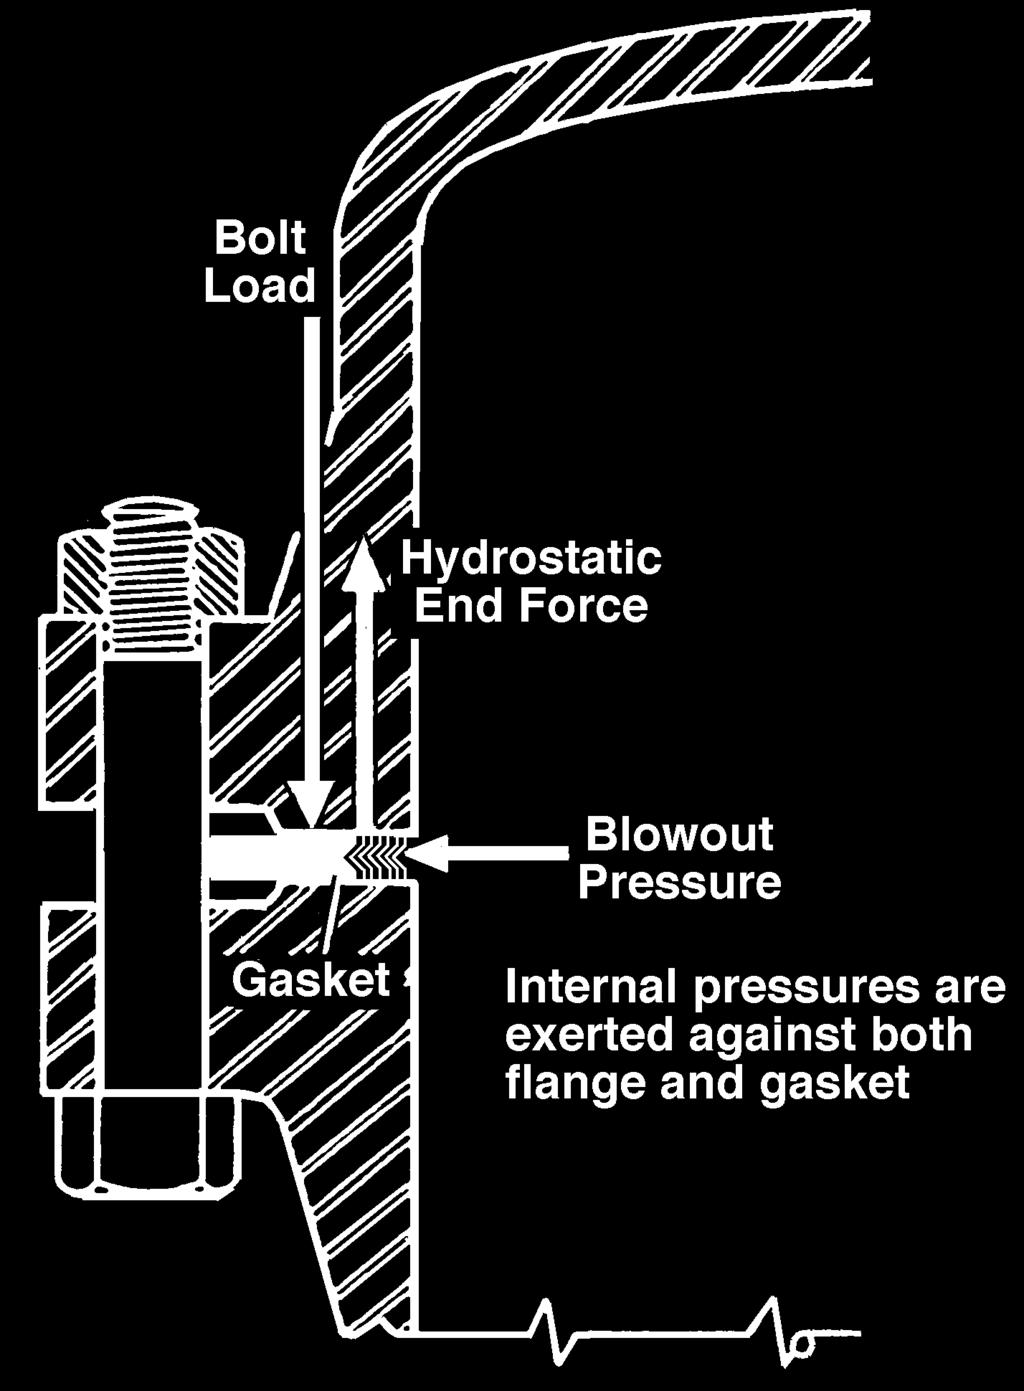 In order to maintain this condition, sufficient load must be applied to the connection to oppose the hydrostatic end force created by the internal pressure of the system.